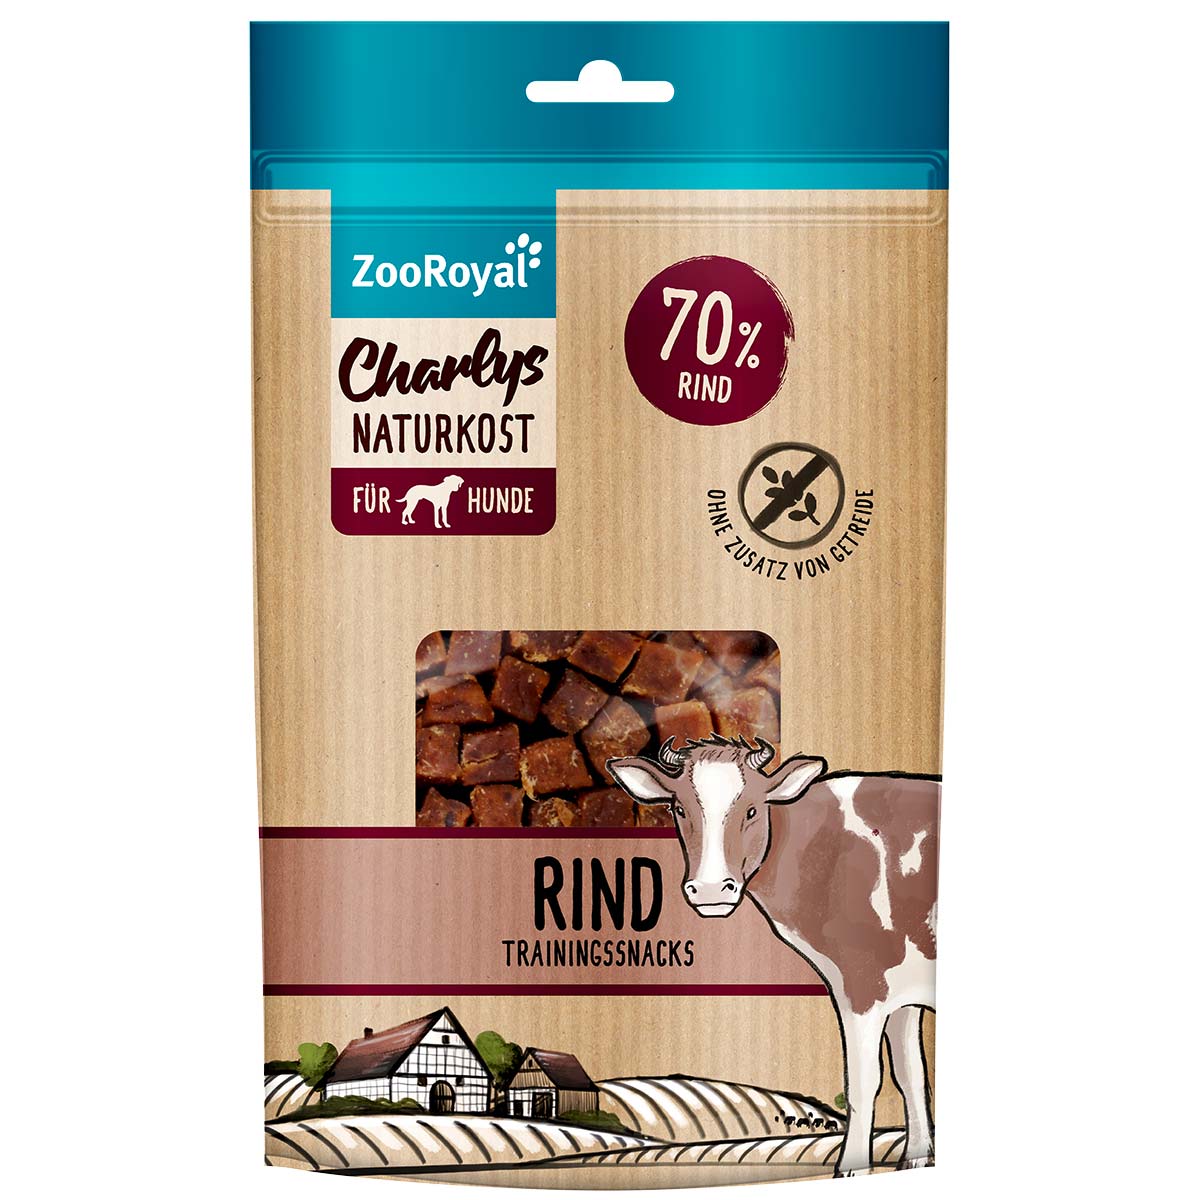 ZooRoyal Charlys Naturkost Trainingssnack Rind 3x100g von ZooRoyal Charlys Naturkost